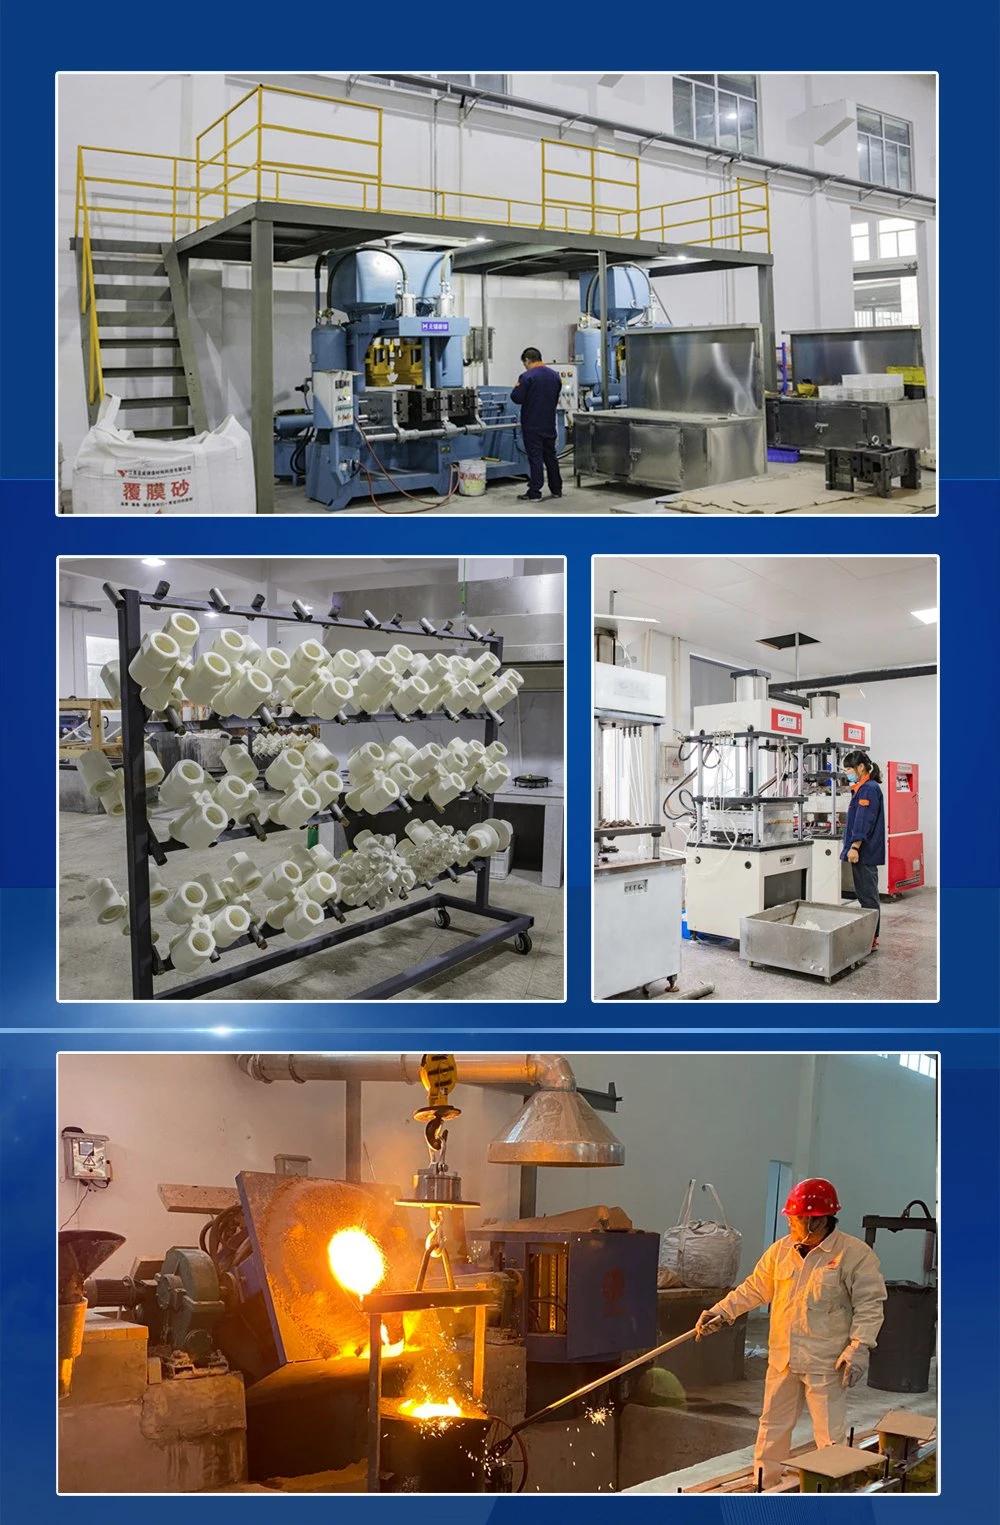 Casting, Forging, Pressing, Equipment, Mining, Nuts, Accessories, Component, Construction, Auto Part, Hot Galvanized, Power Fitting